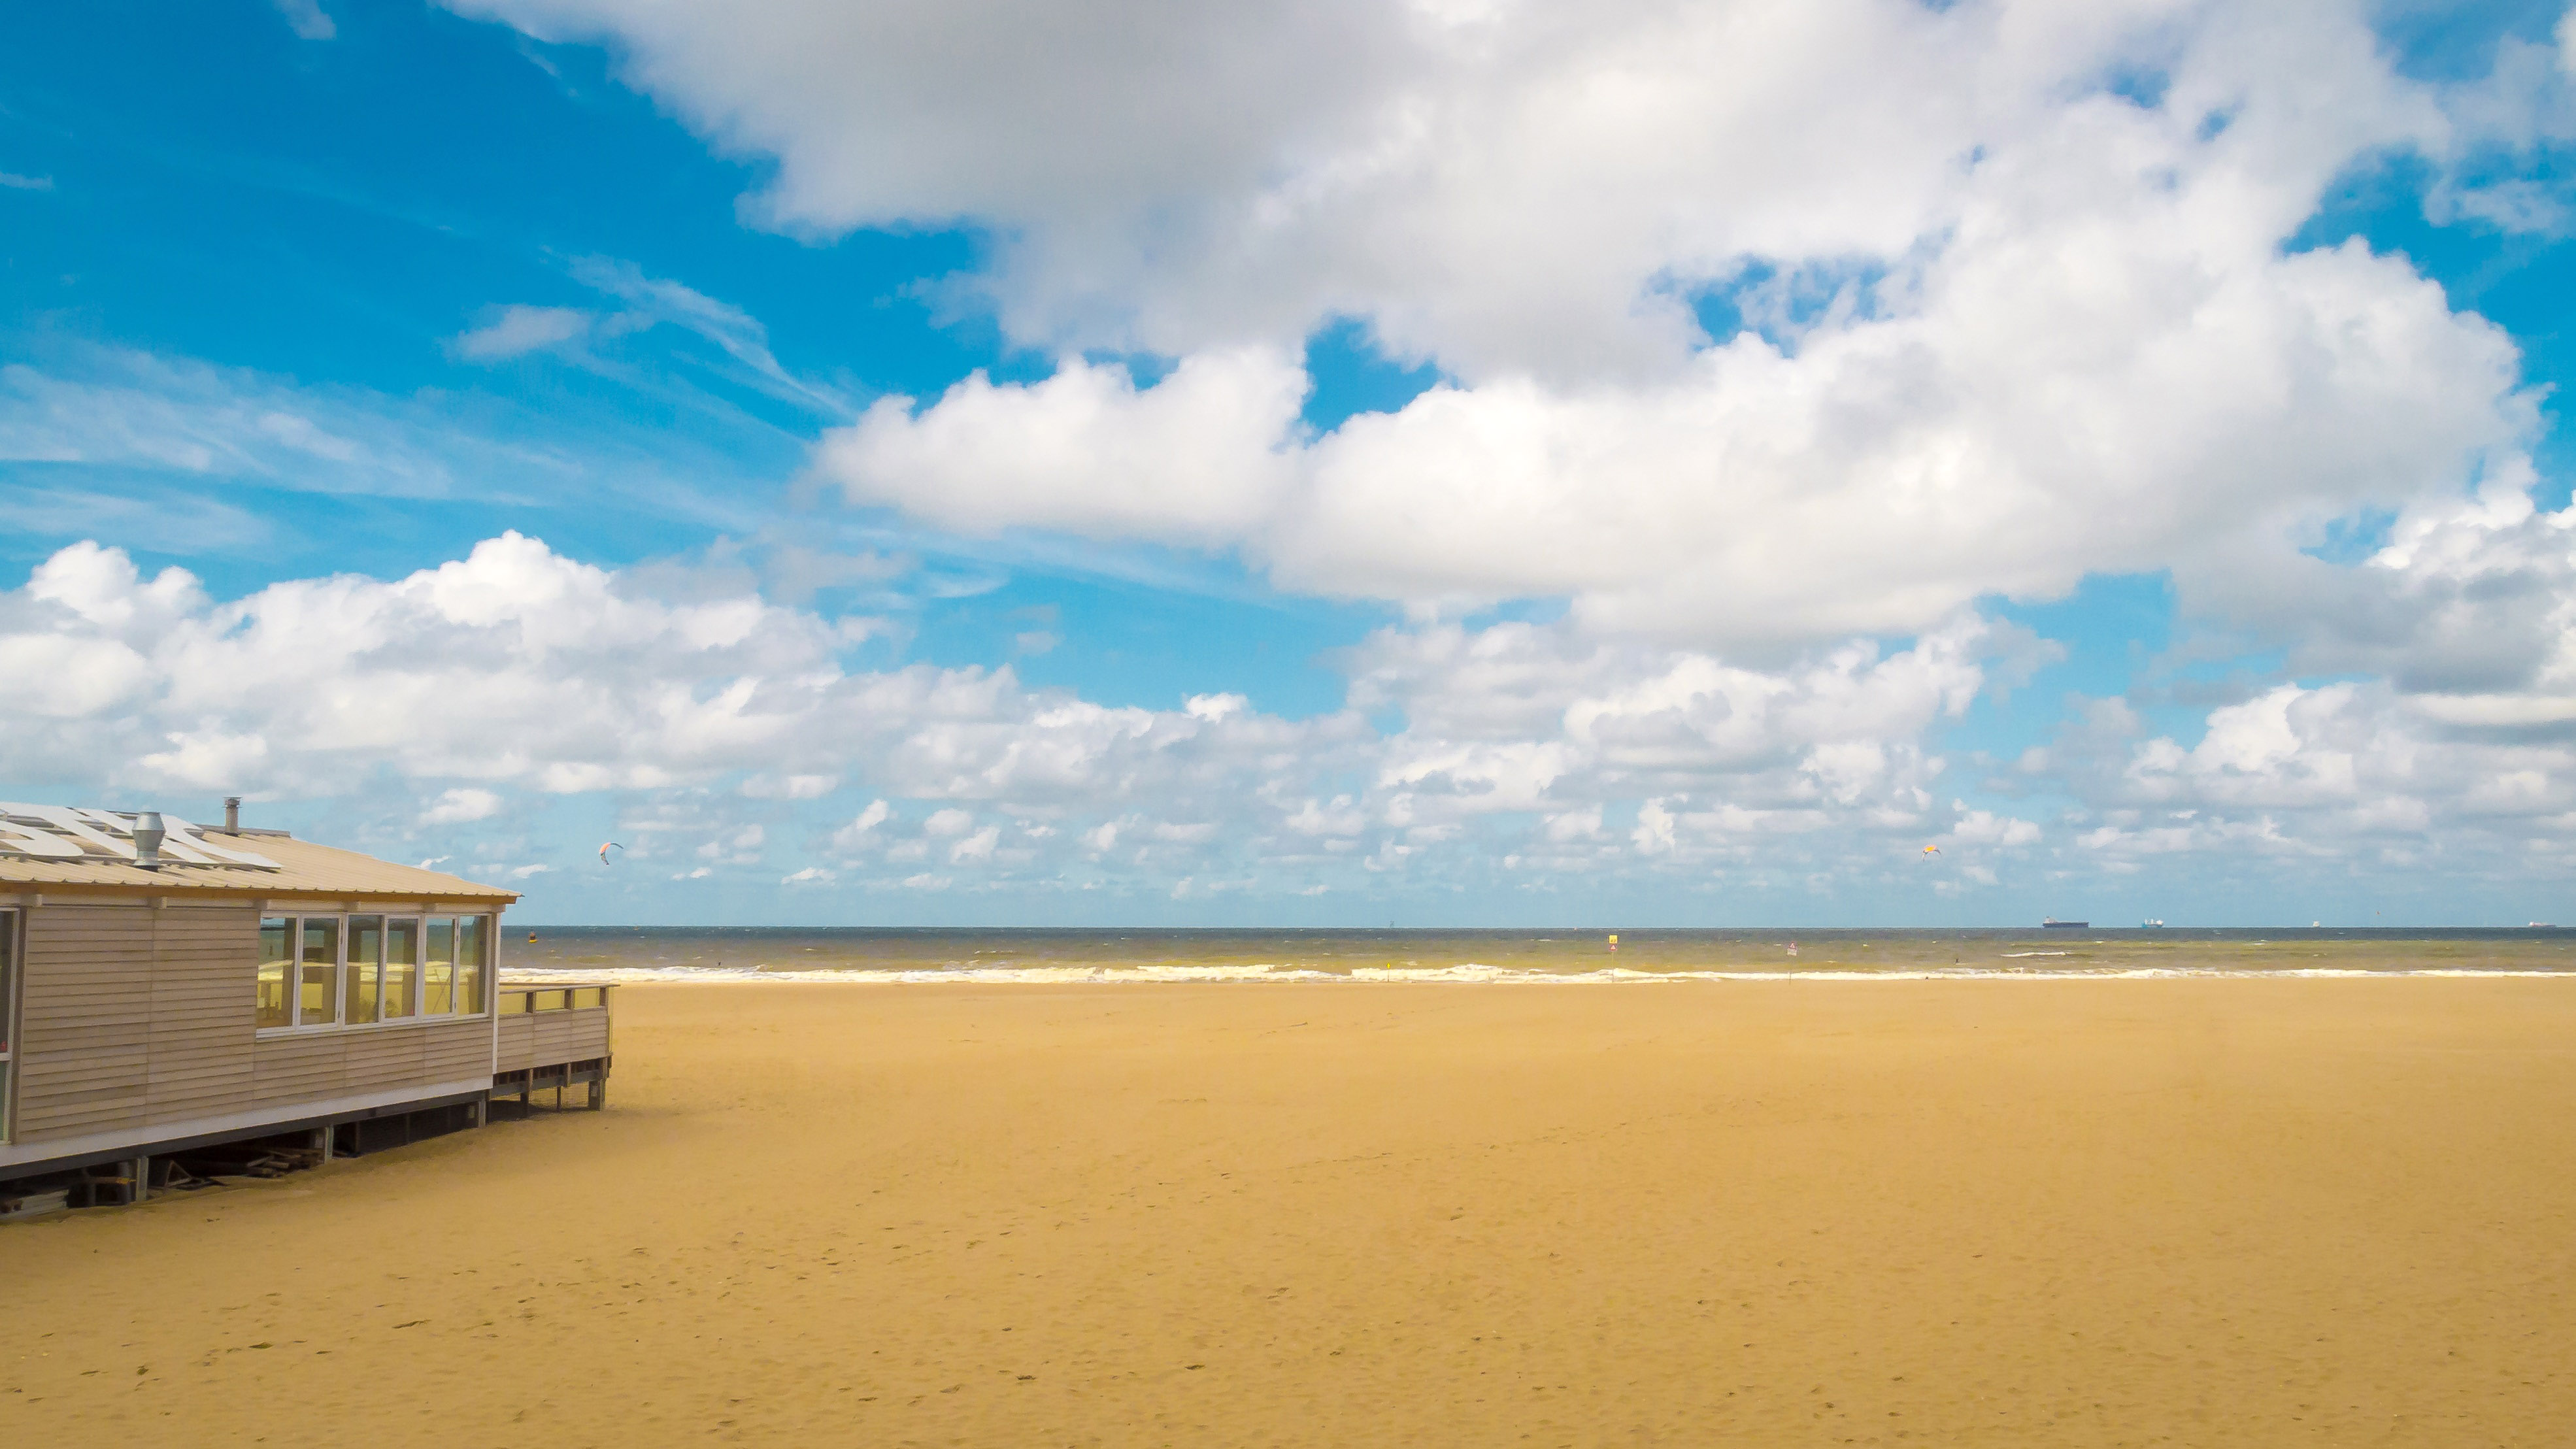 Beautiful beach landscape under the sky and clouds in The Hague